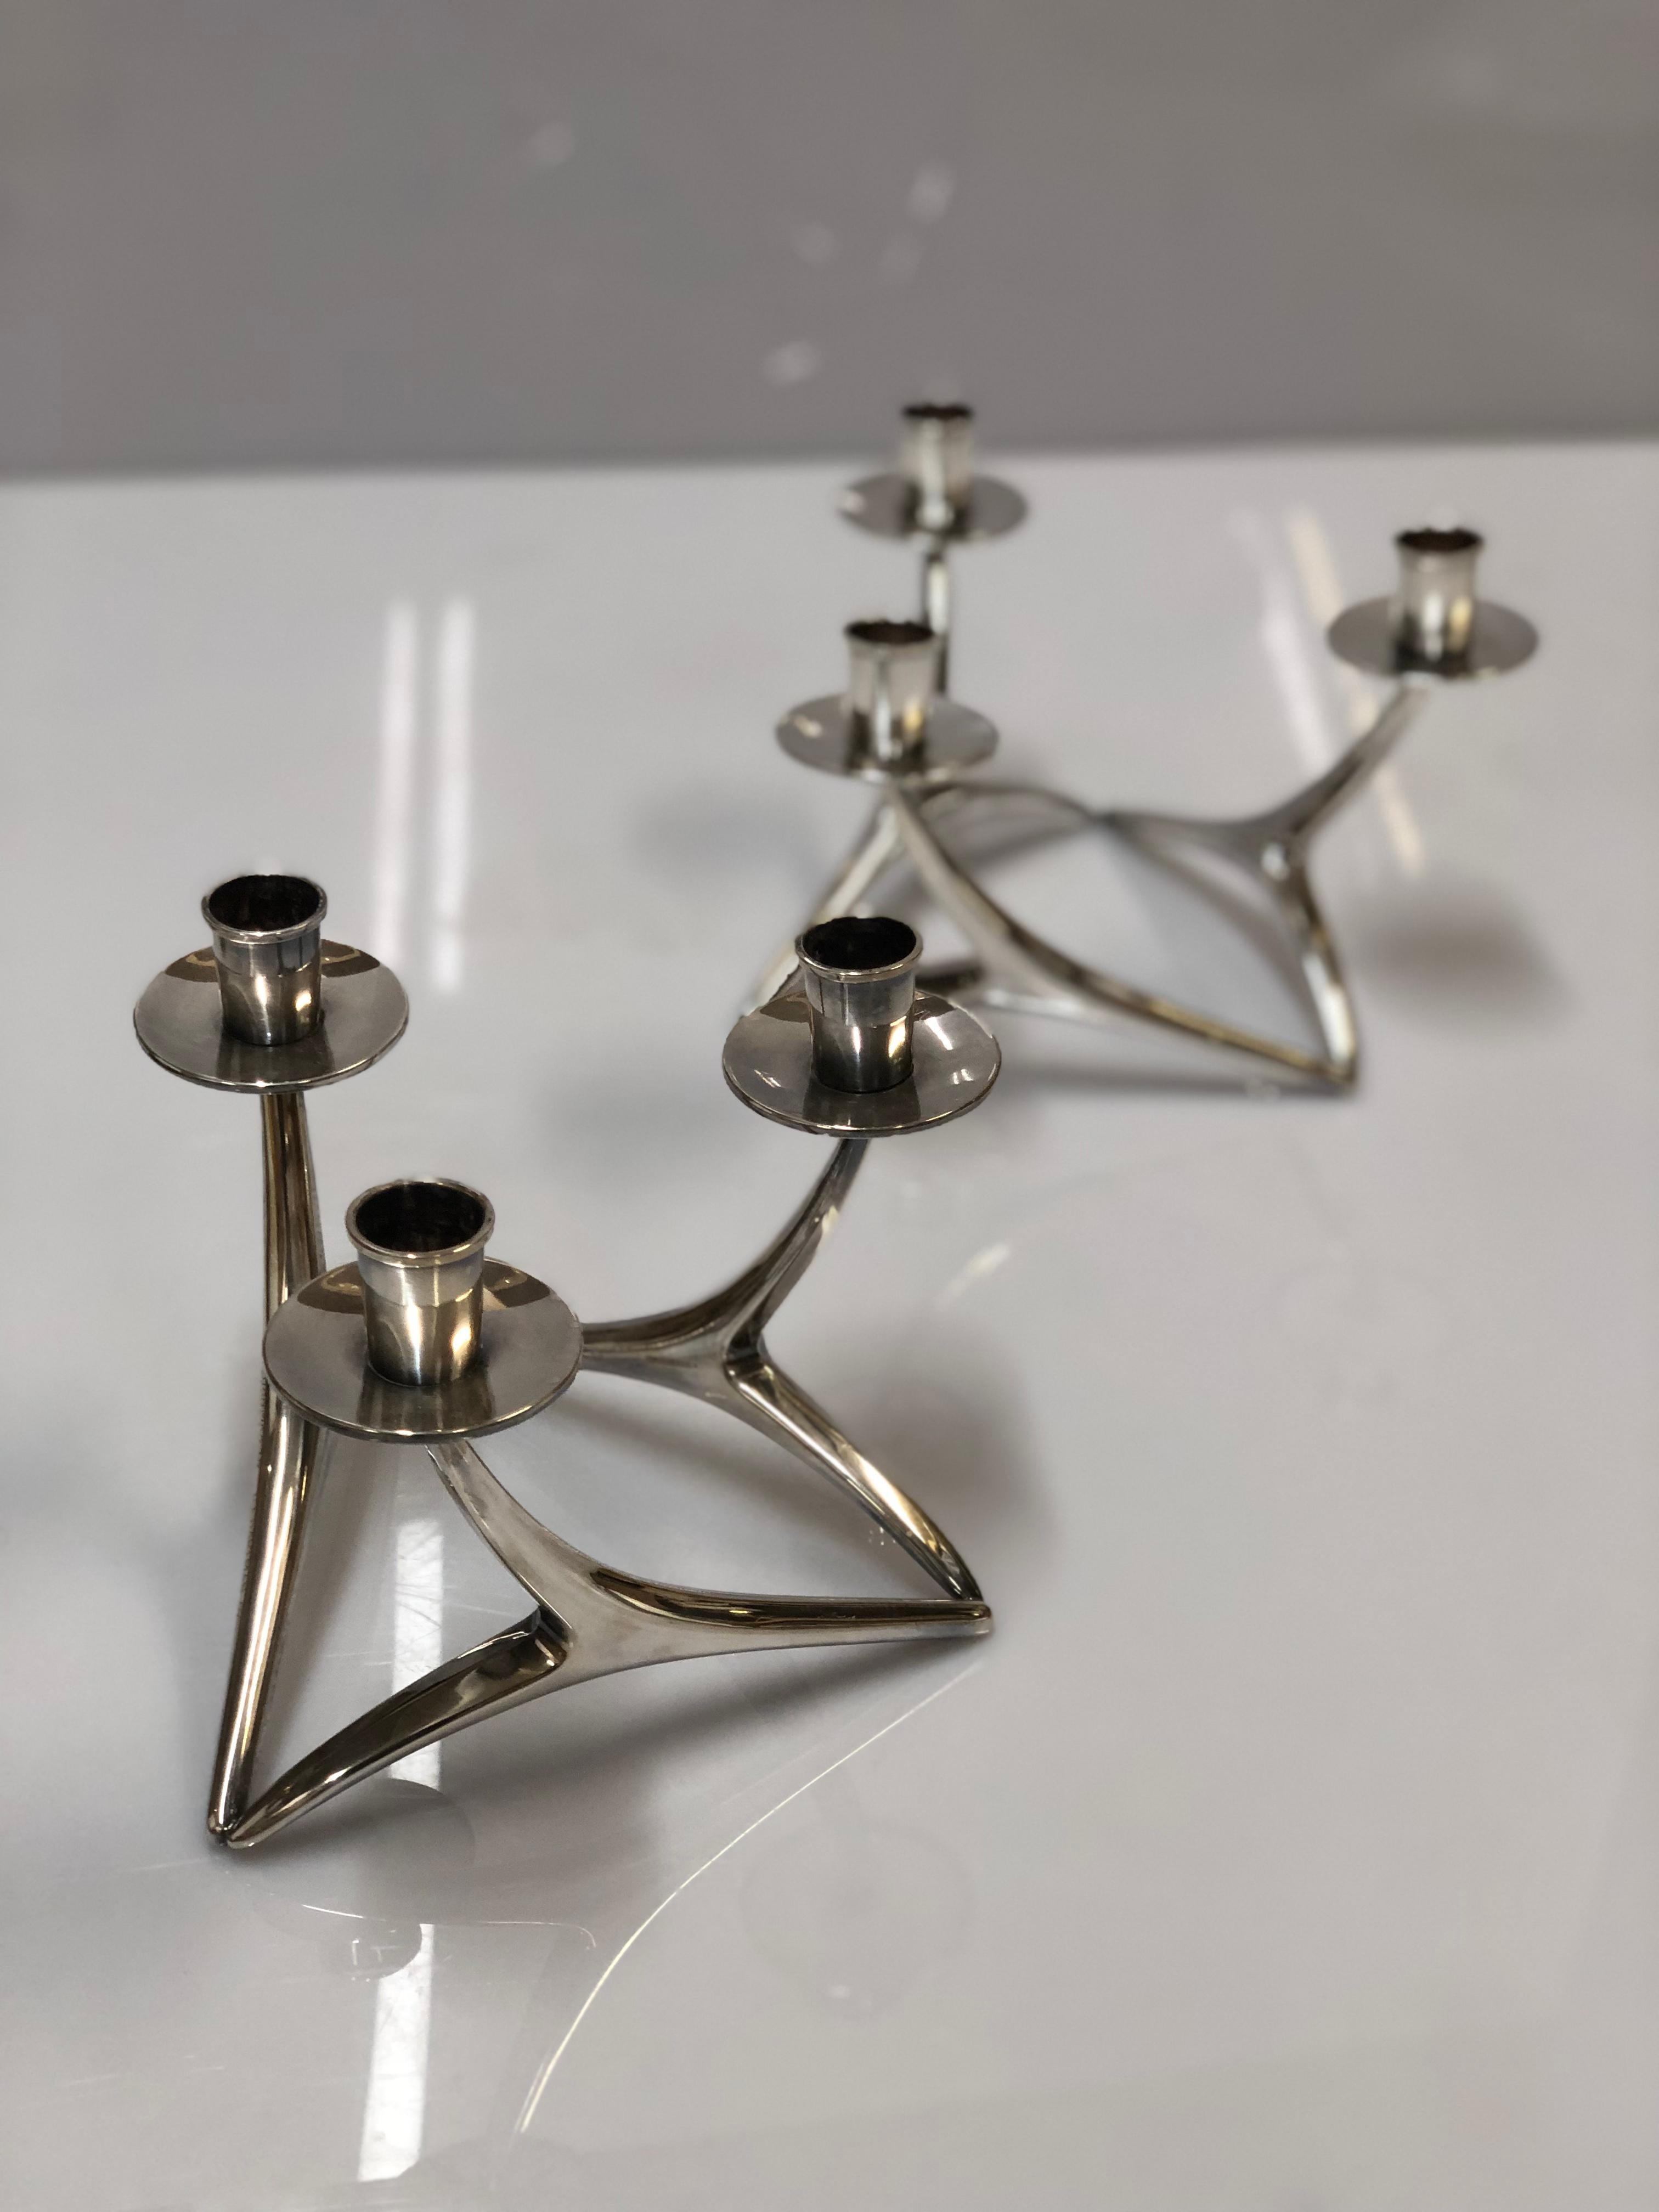 A set of 2 very beautiful candleholders designed by Anna Greta-Eker. These pieces are apart of a very well known series of candle holders in different sizes and shapes but in the same design by Anna Greta-Eker. These 2 in particular are amongst the